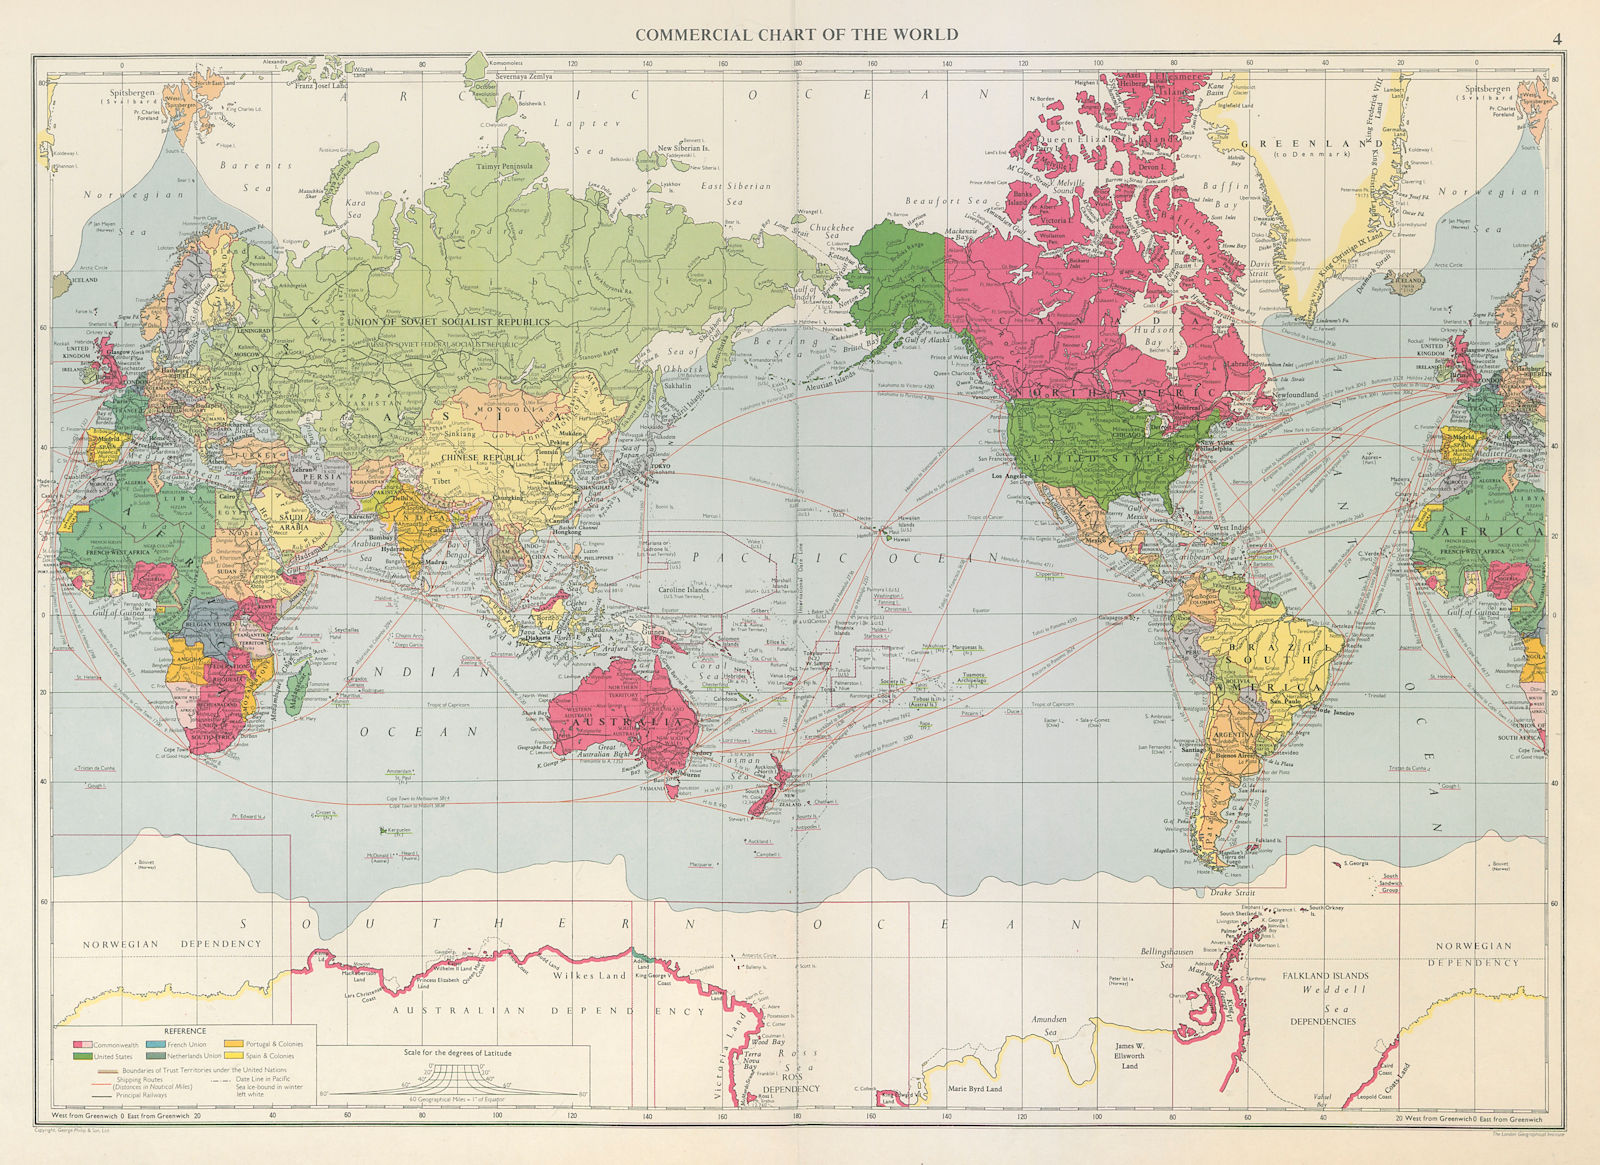 World Commercial Chart shipping routes. Commonwealth/French Union LARGE 1959 map